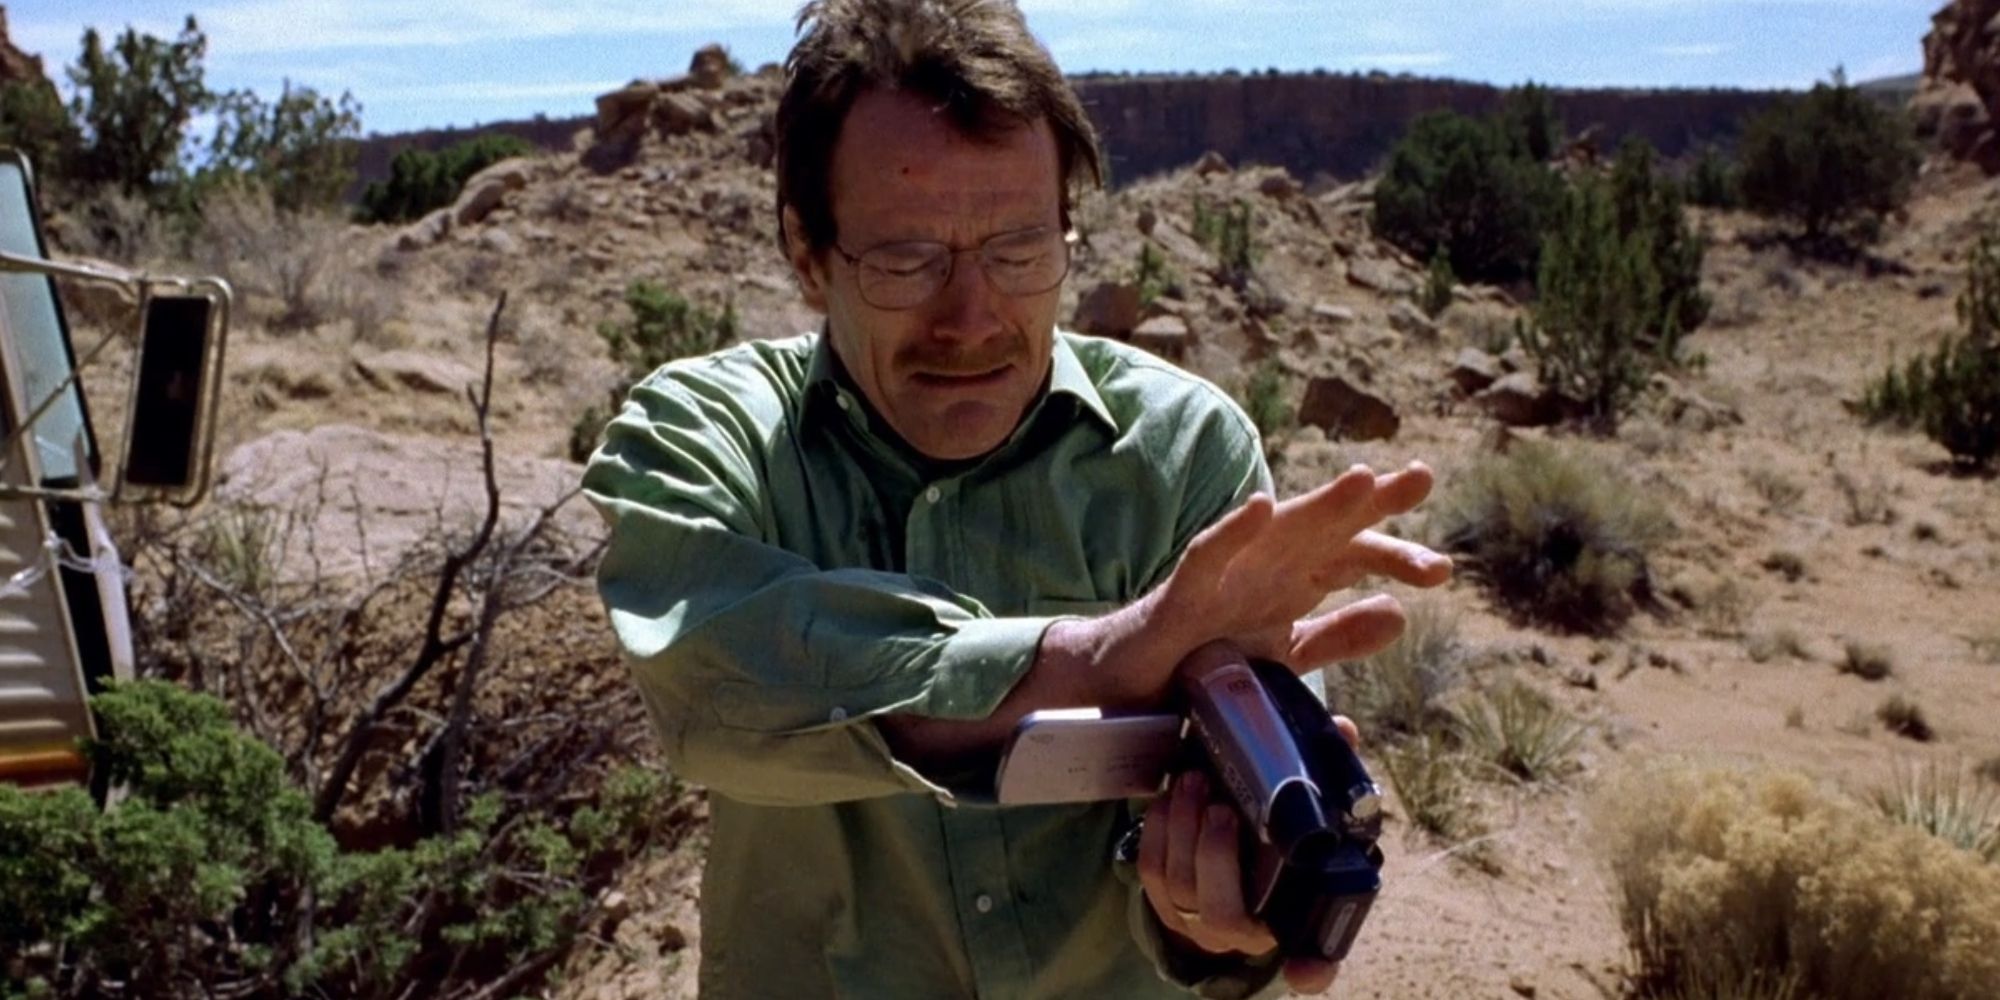 Walter White with the video camera in the opening scene of Breaking Bad